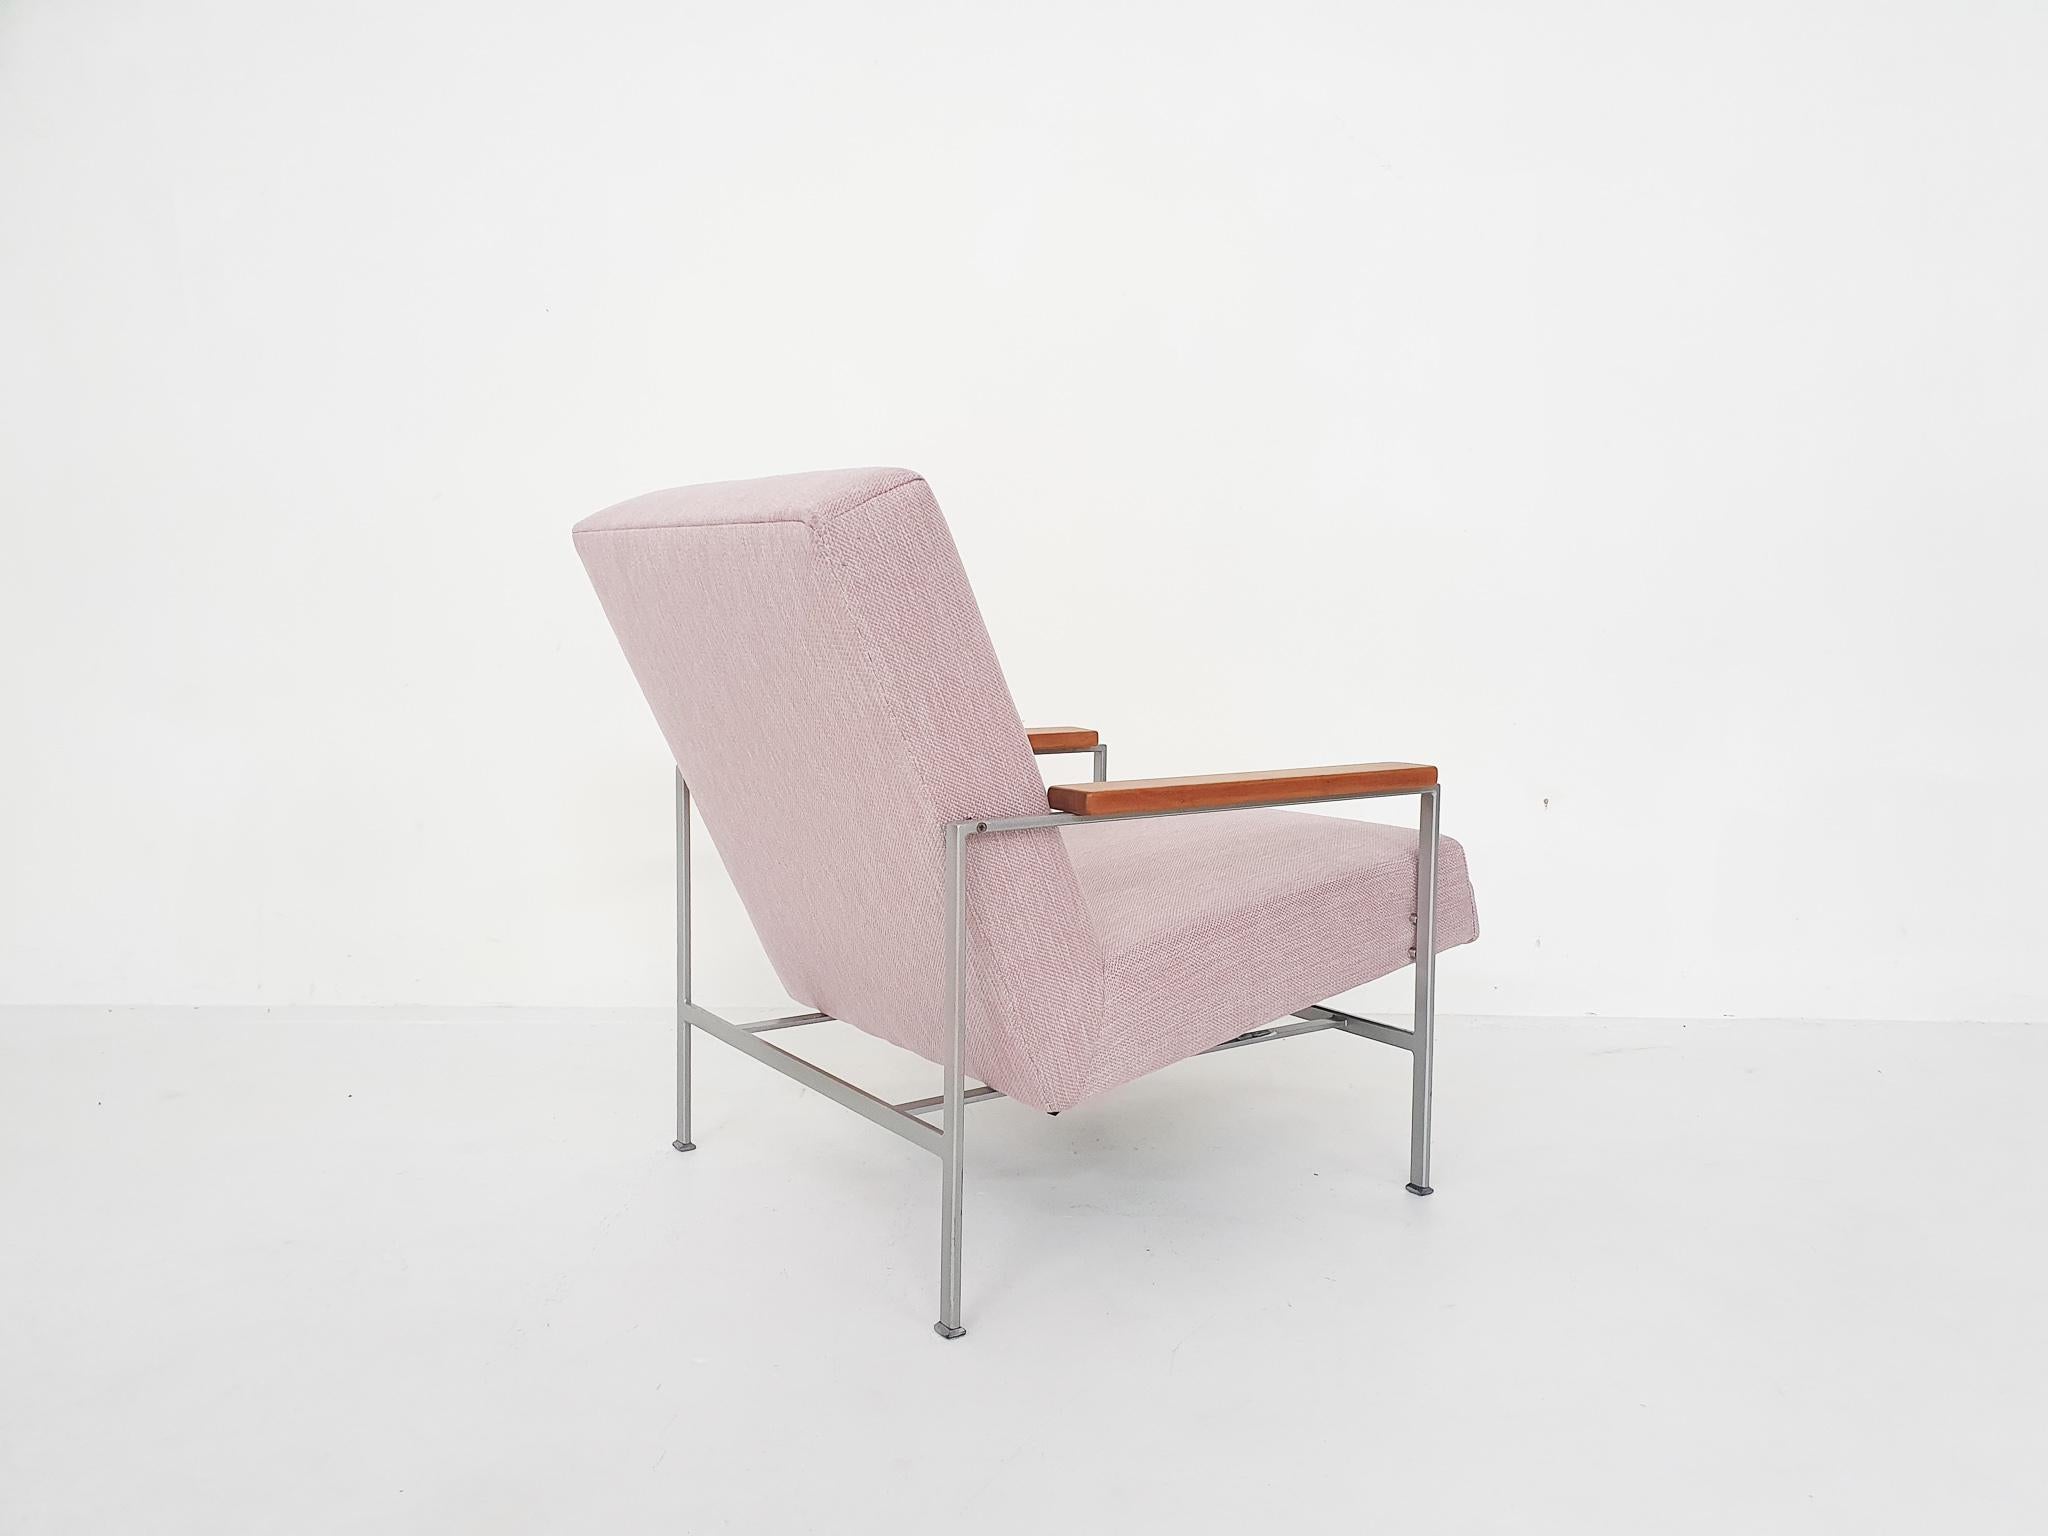 Metal Rob Parry for Gelderland Model 2280 Lounge Chair, The Netherlands 1950's